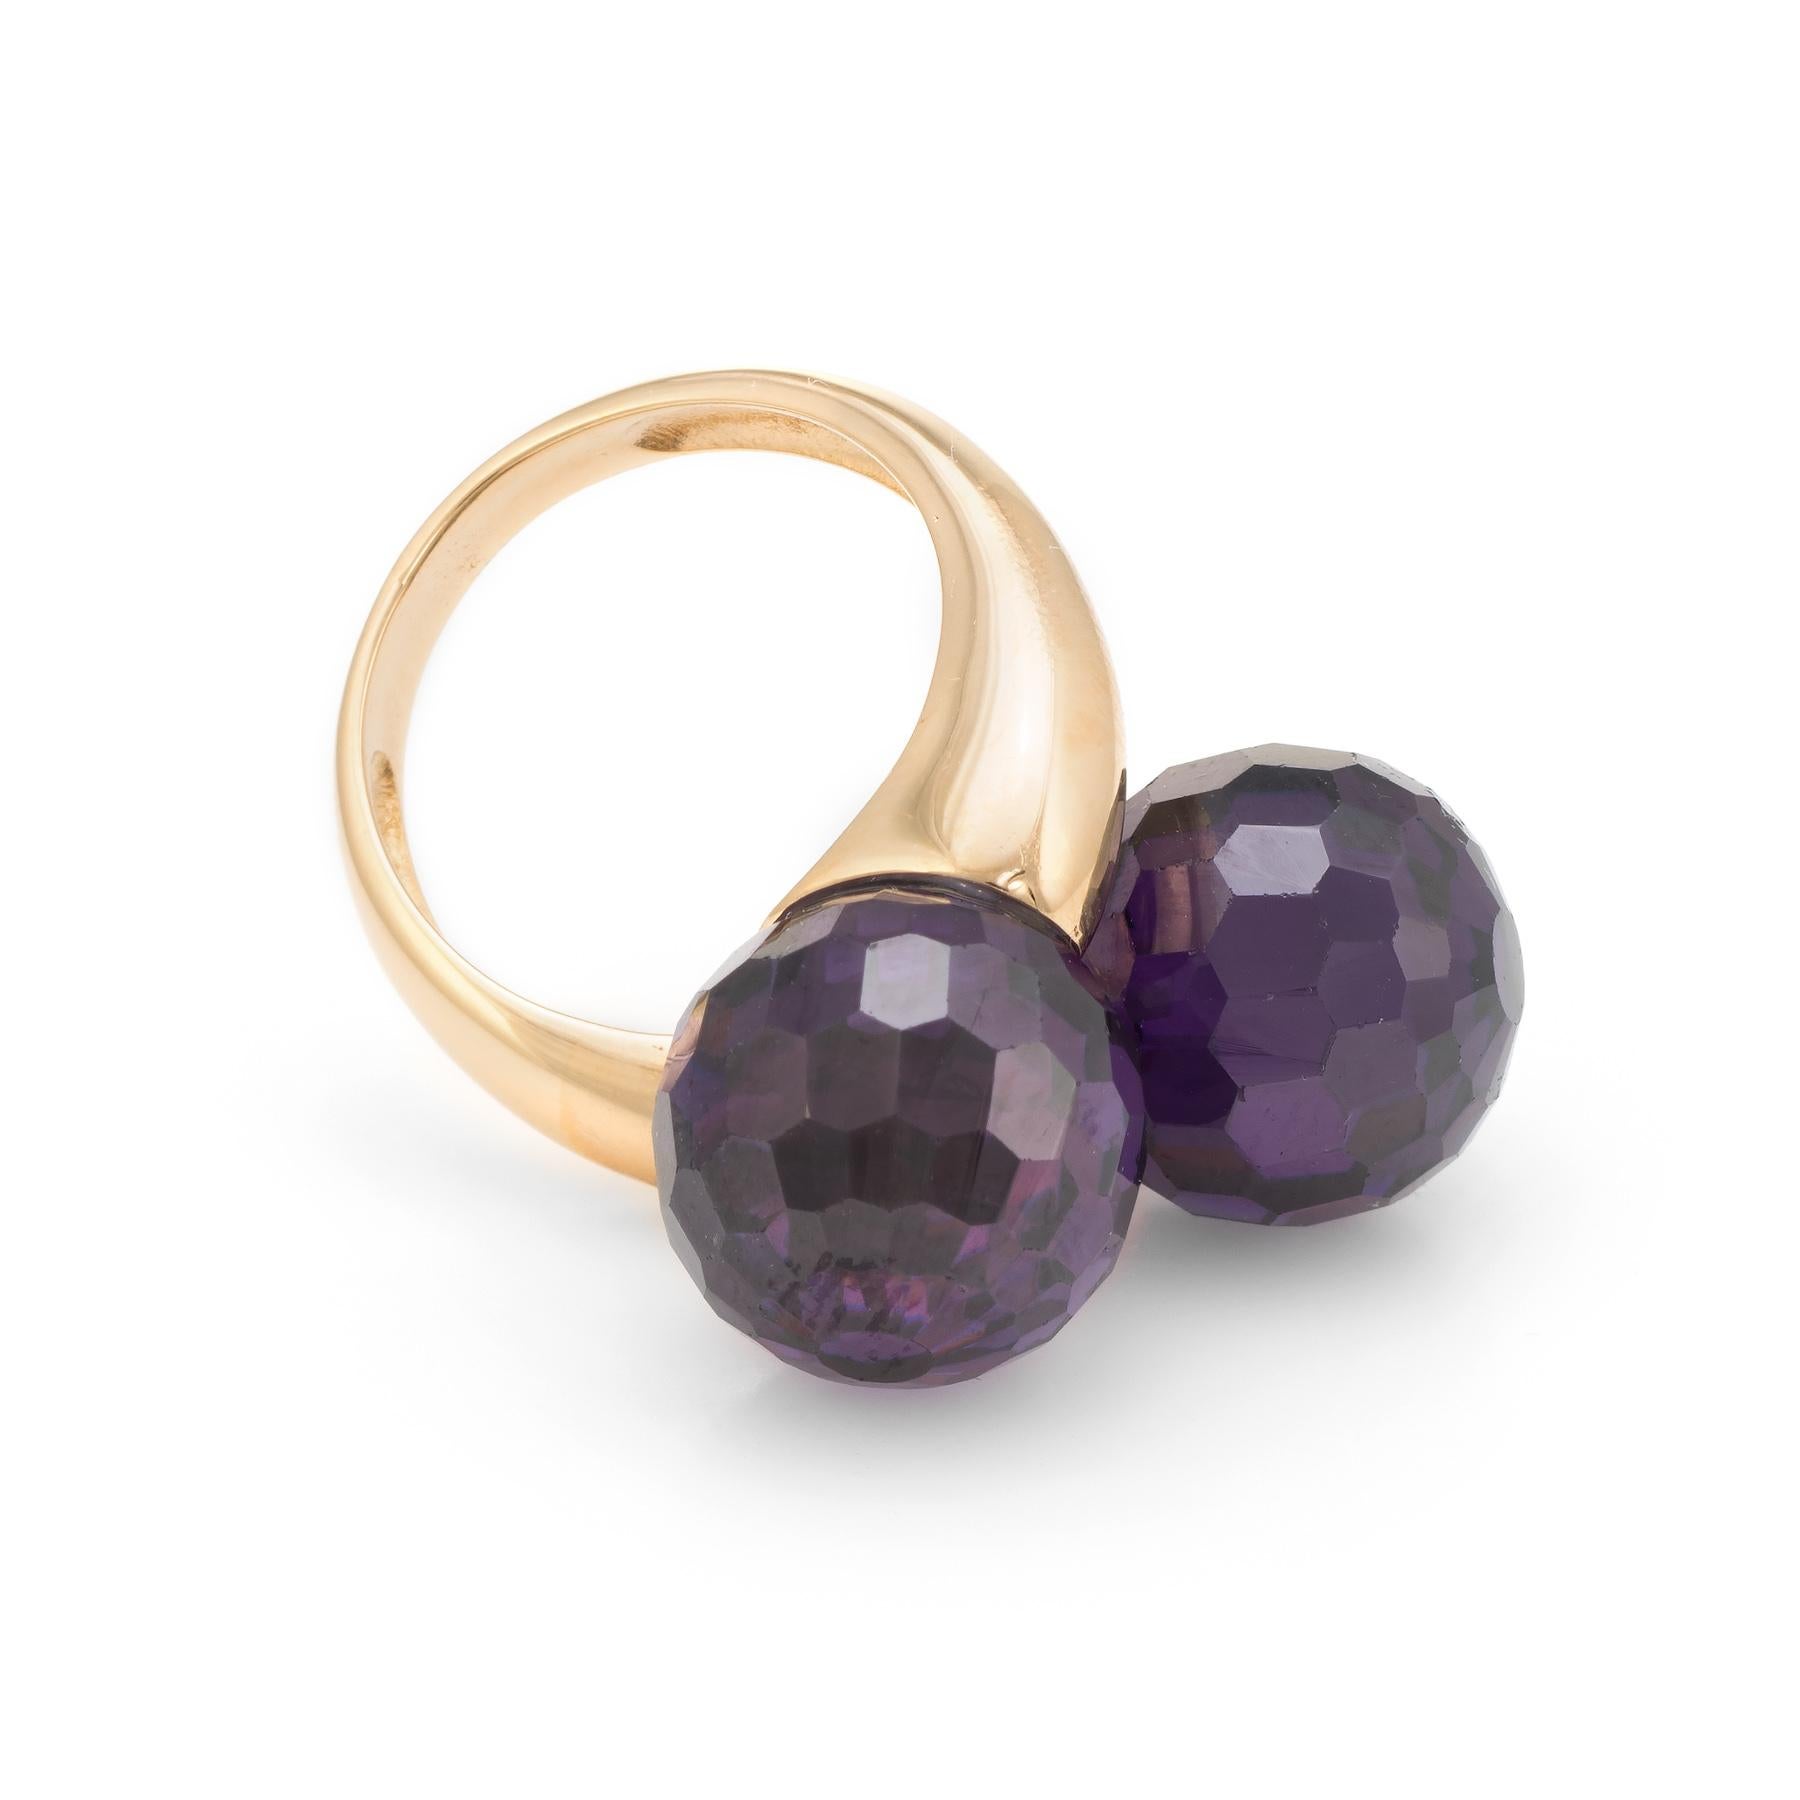 Elegant estate bypass ring, crafted in 18 karat yellow gold. 

Checkerboard faceted amethyst orbs each measure 12mm. The amethyst is in excellent condition and free of cracks or chips.   

The amethysts are set in a 'Moi et Toi' design, a French